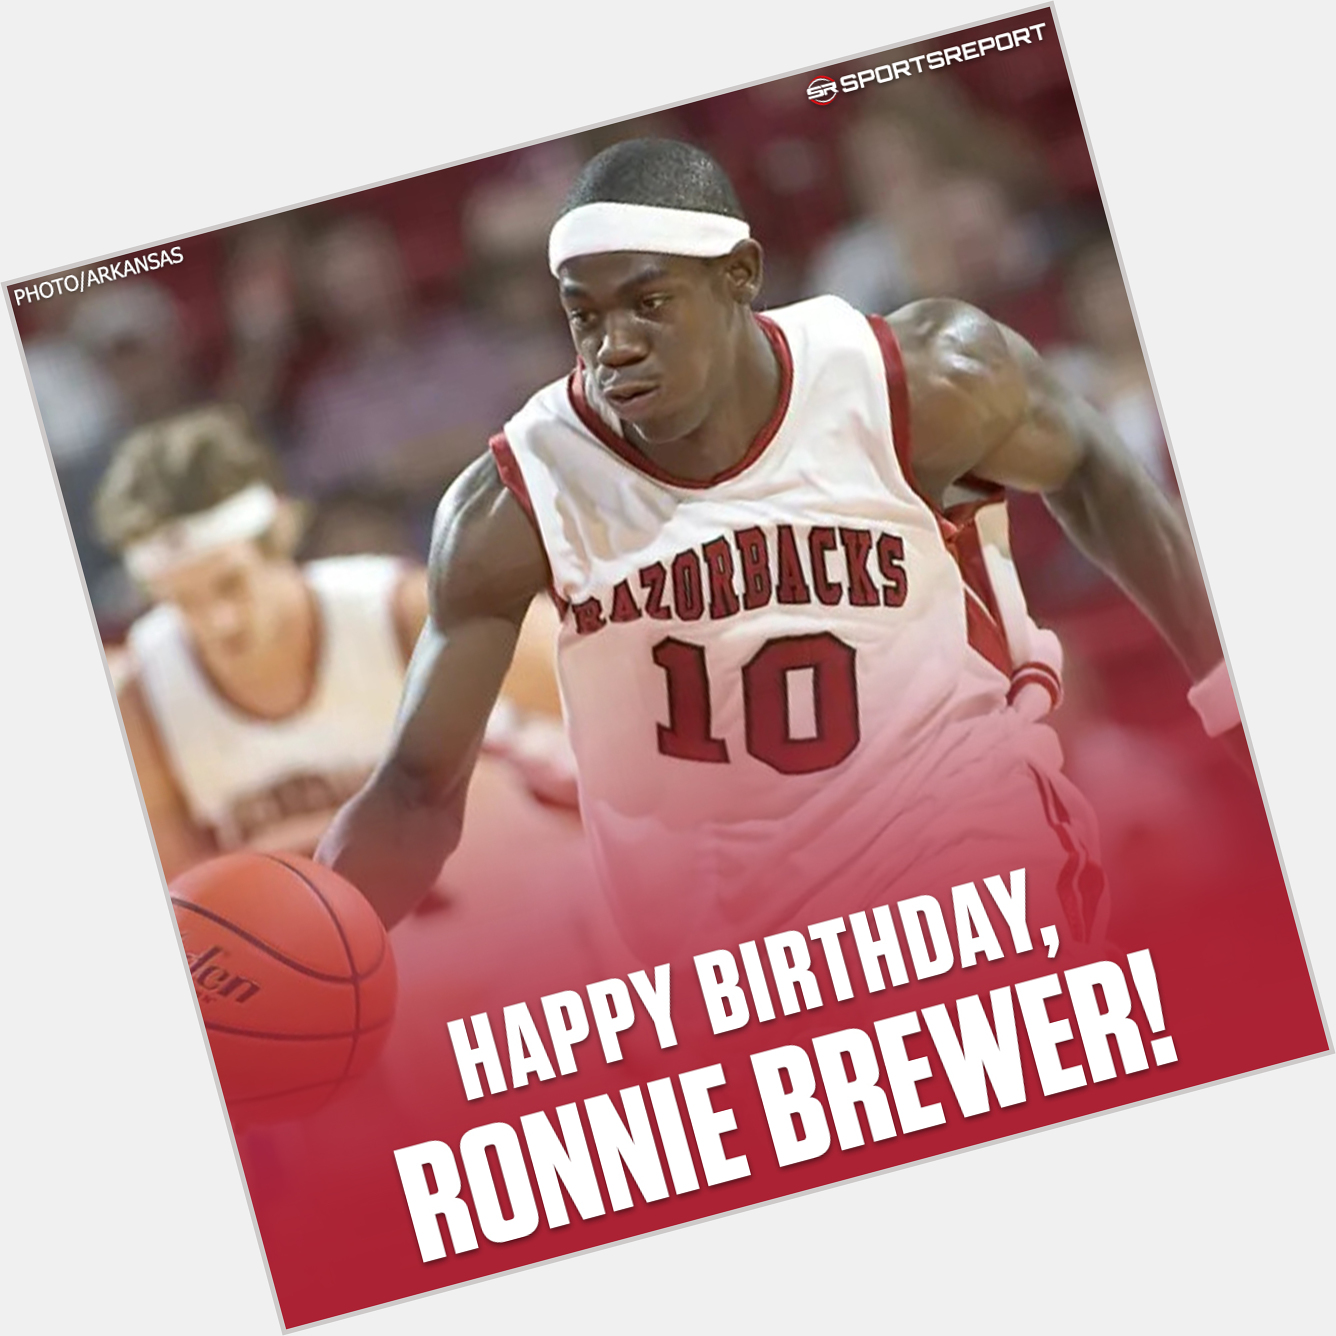 Happy Birthday to great, Ronnie Brewer!  